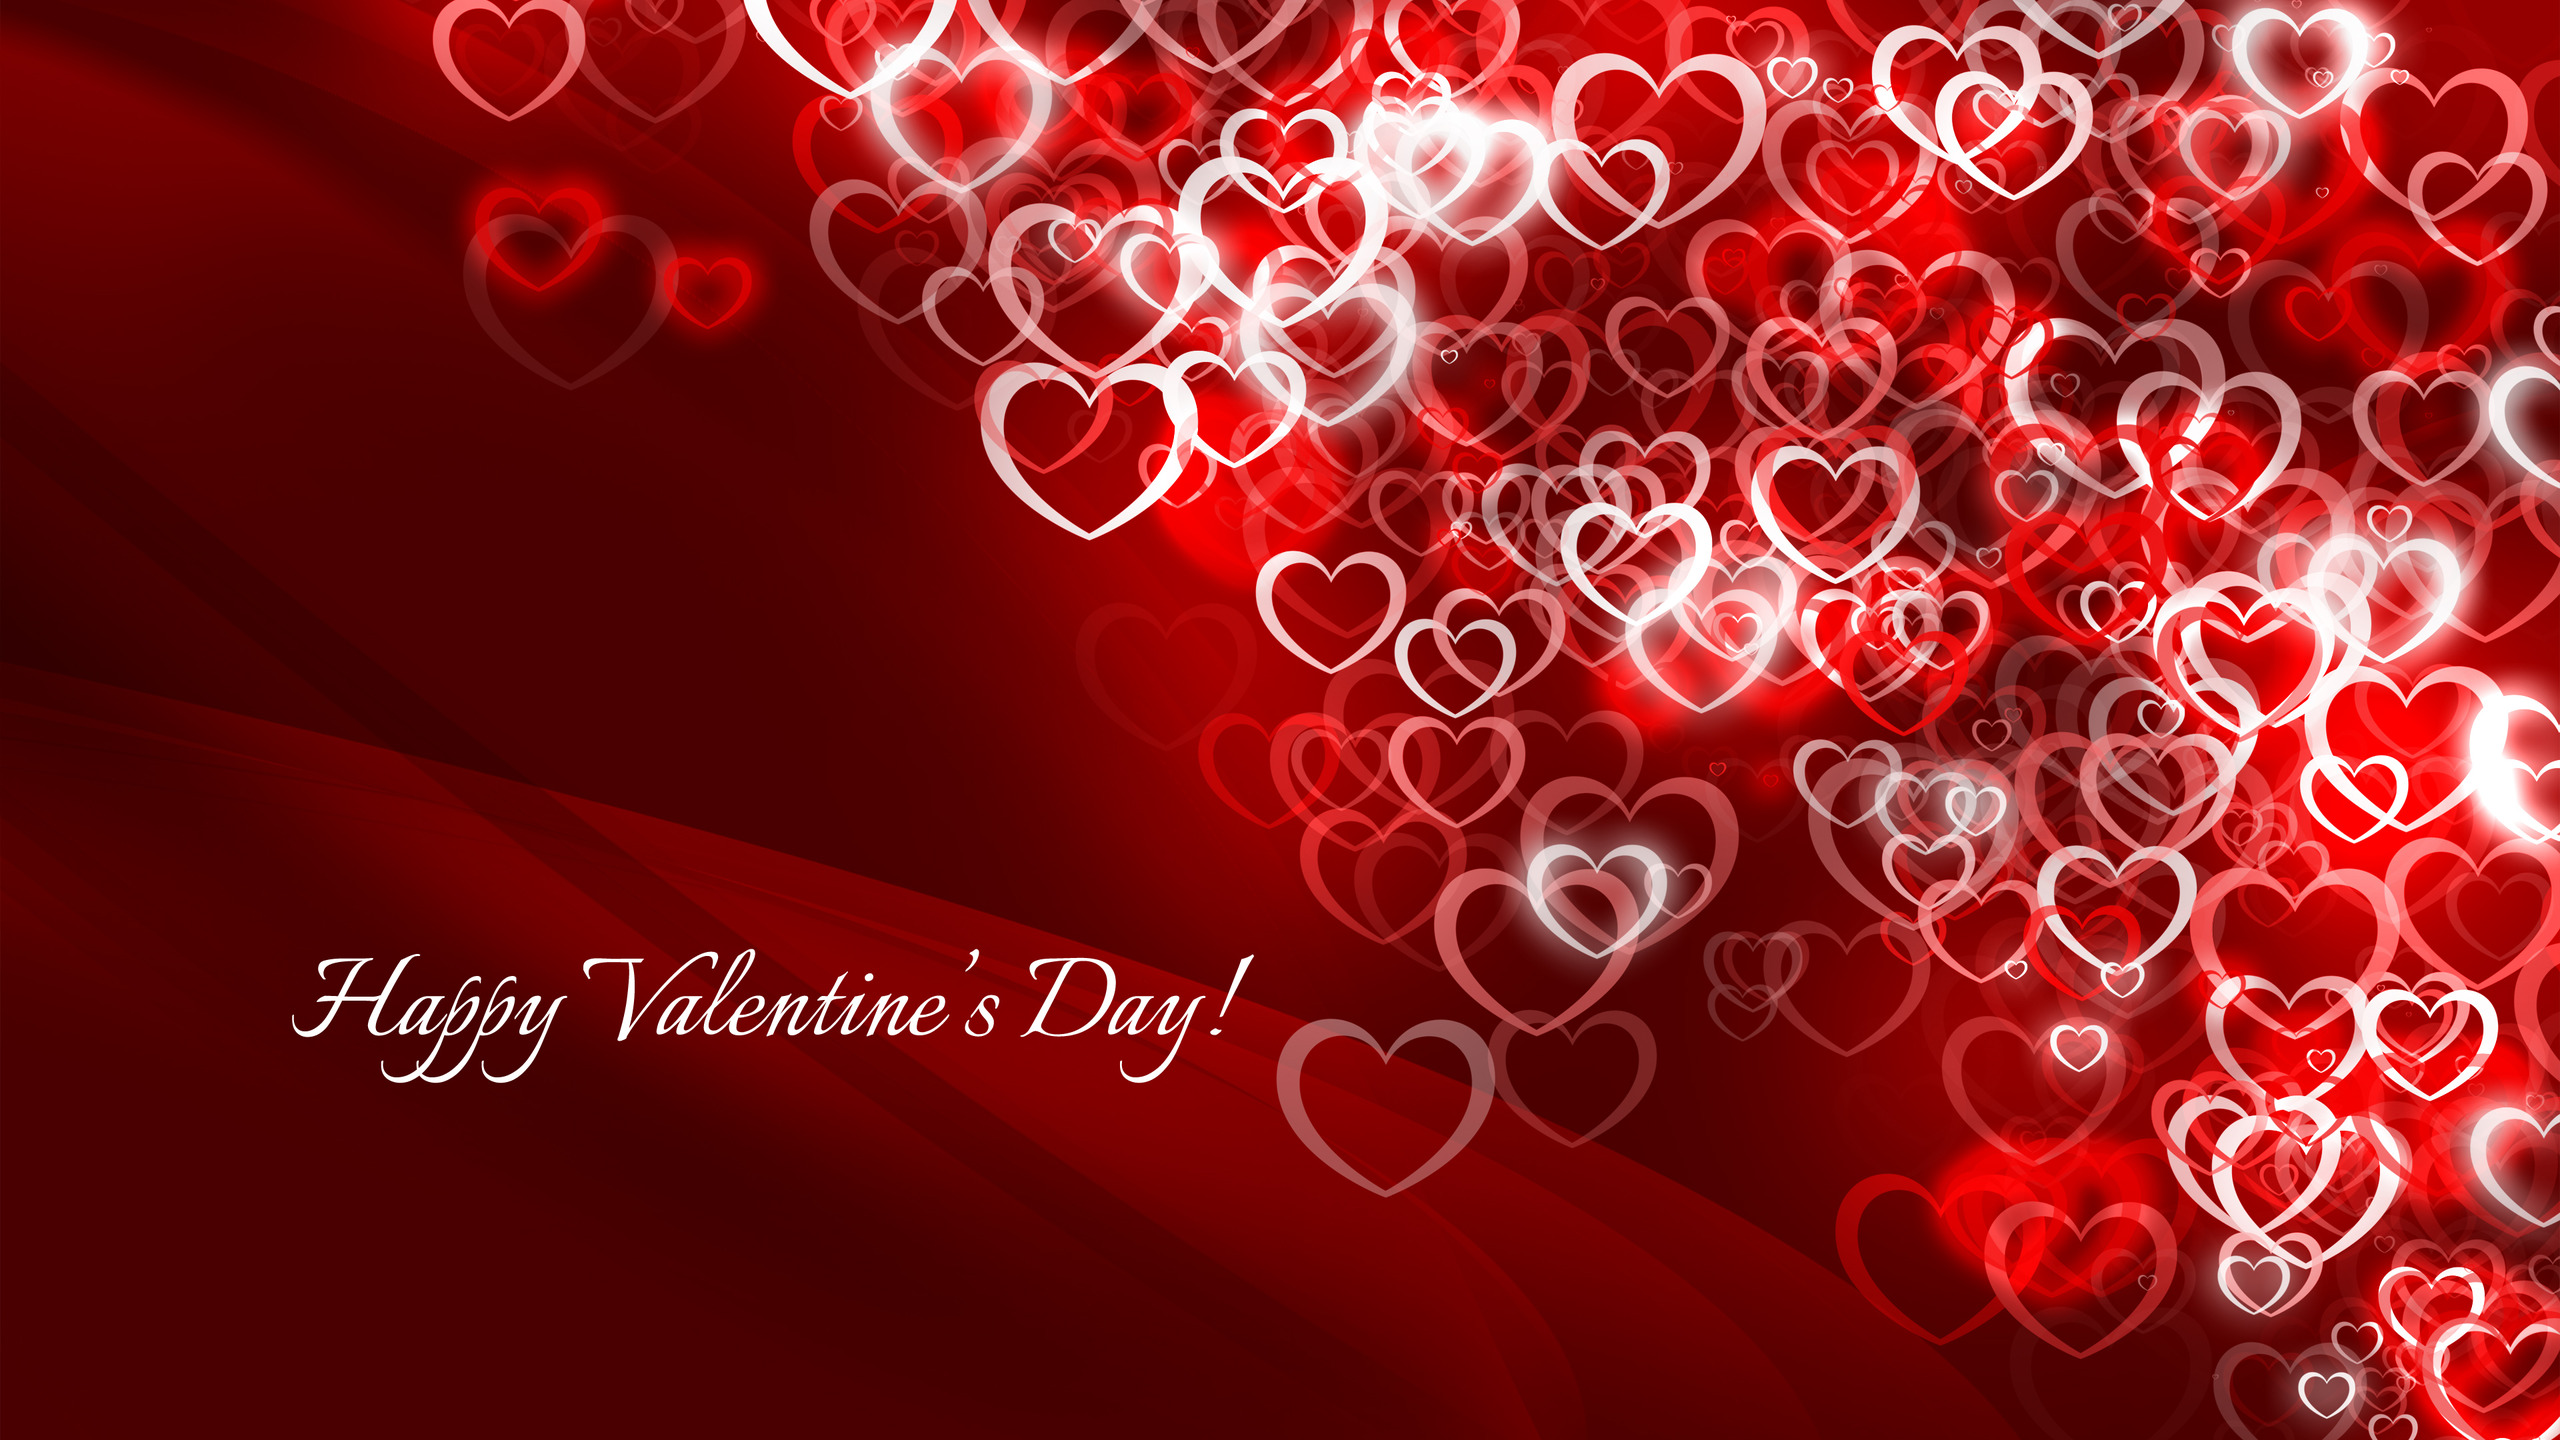 Happy Valentine's Day Wallpapers HD